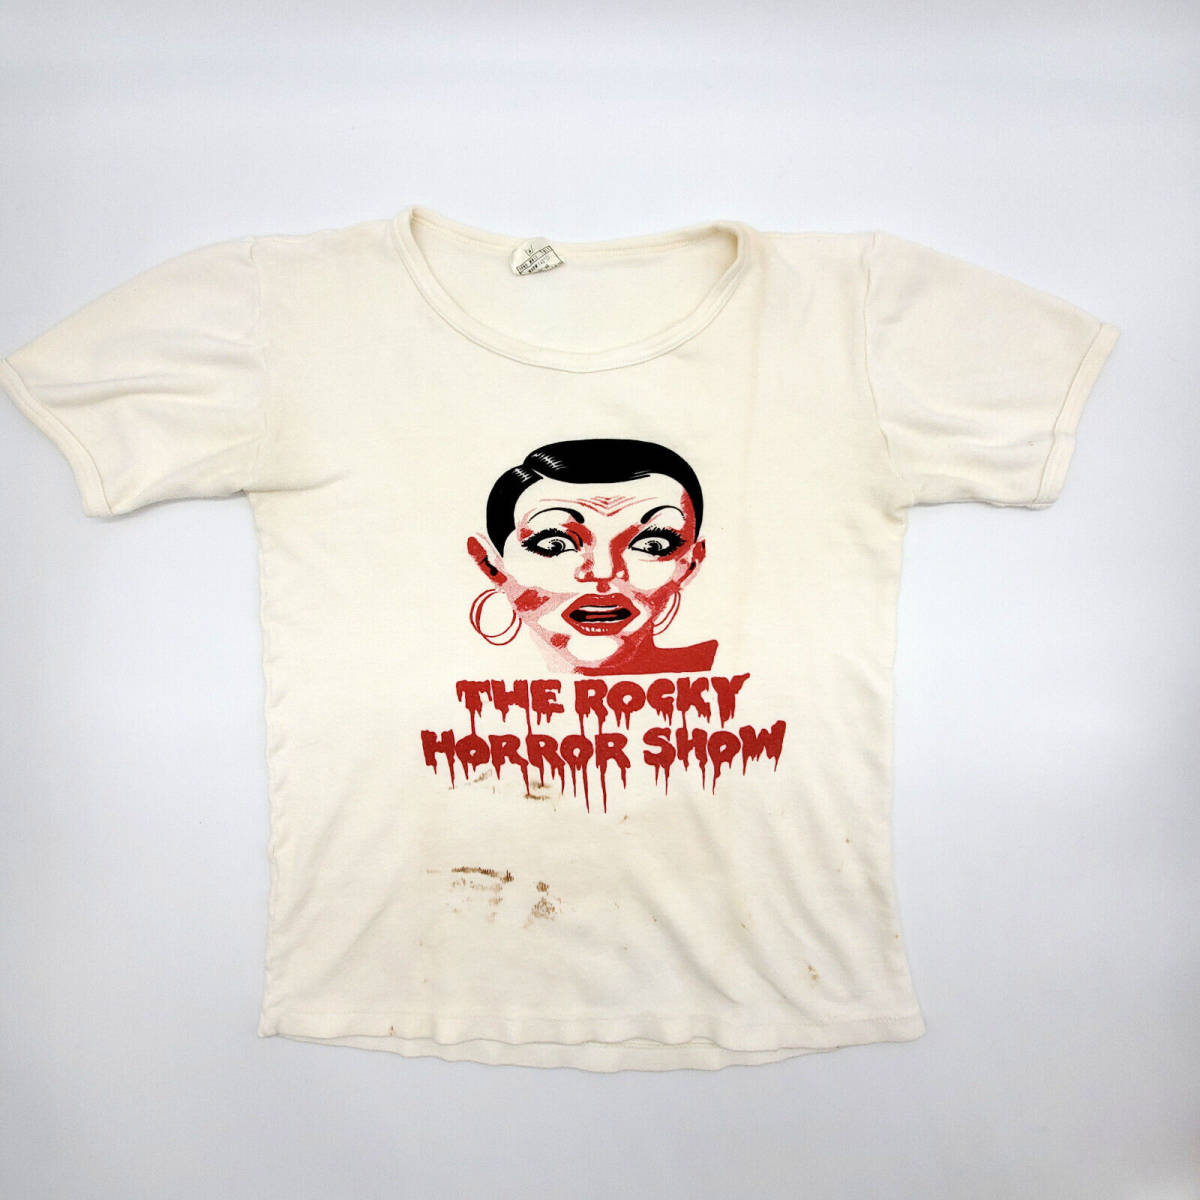 The Rocky Horror Picture Show Large 70s Theater Movie Promo T Shirt Vintage Tee 海外 即決